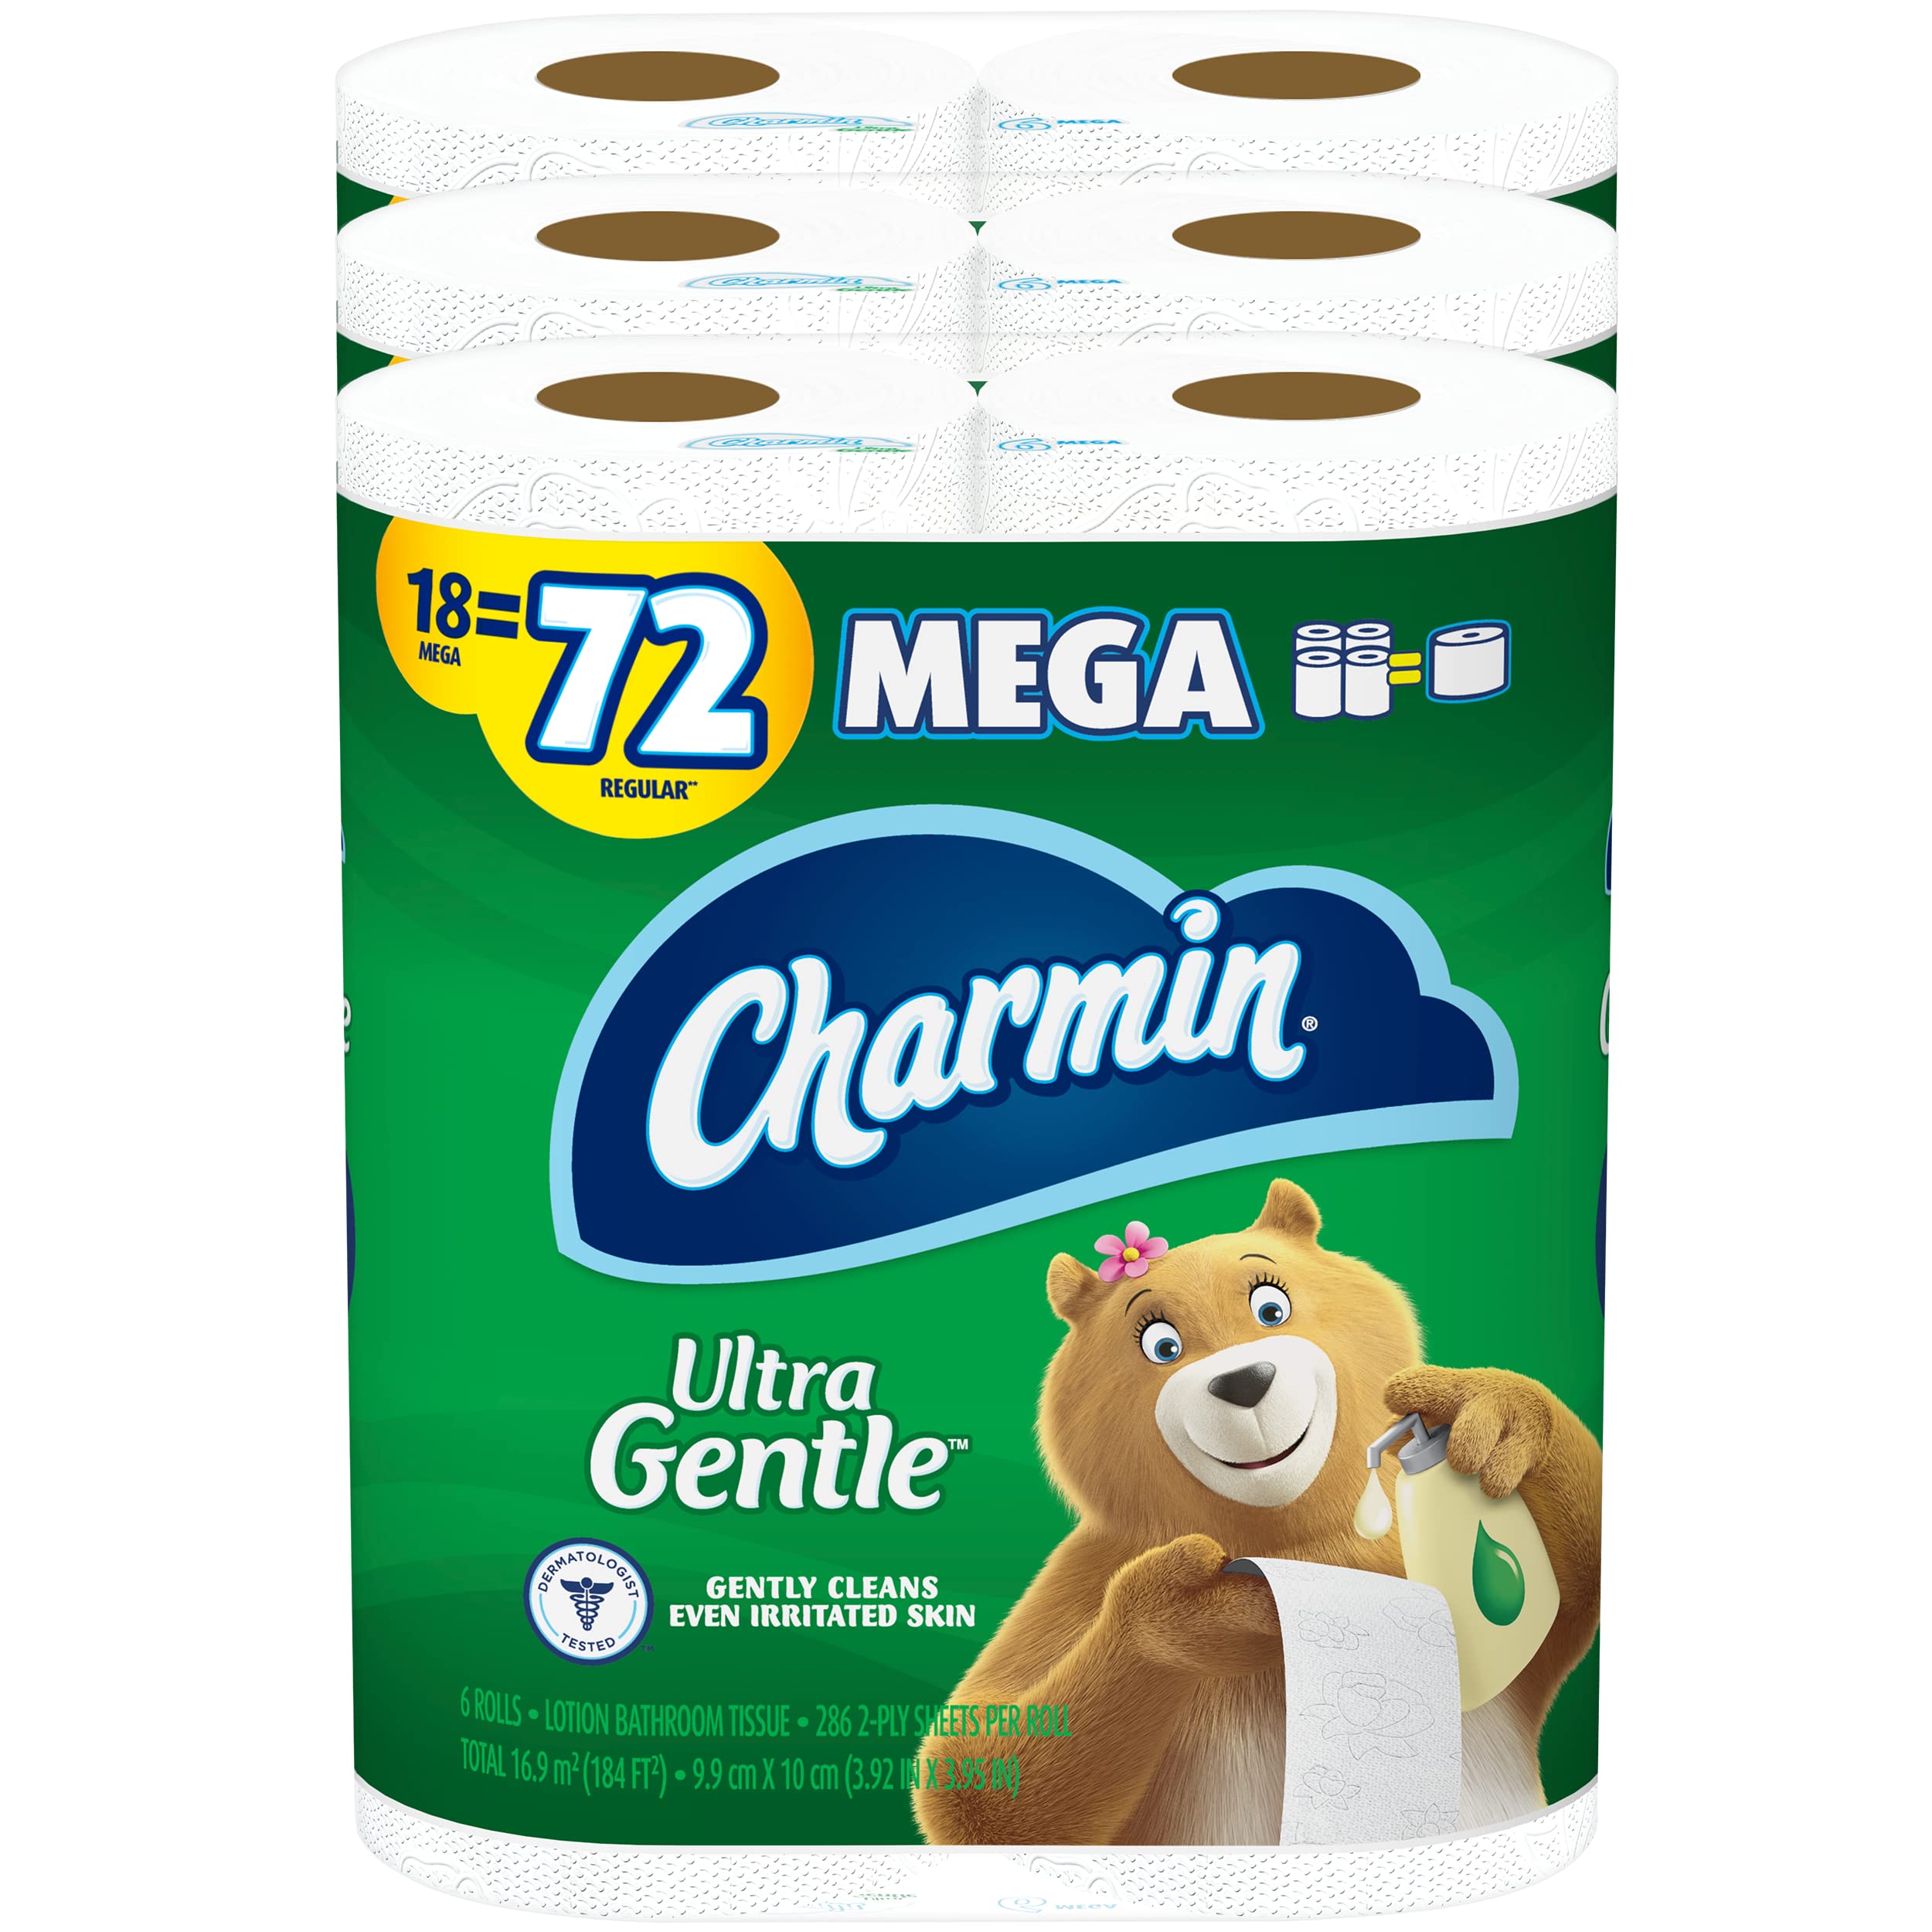 Charmin Ultra Gentle Toilet Paper, 18 Mega Rolls = 72 Regular Rolls, 6 Count (Pack of 3) - Packaging May Vary